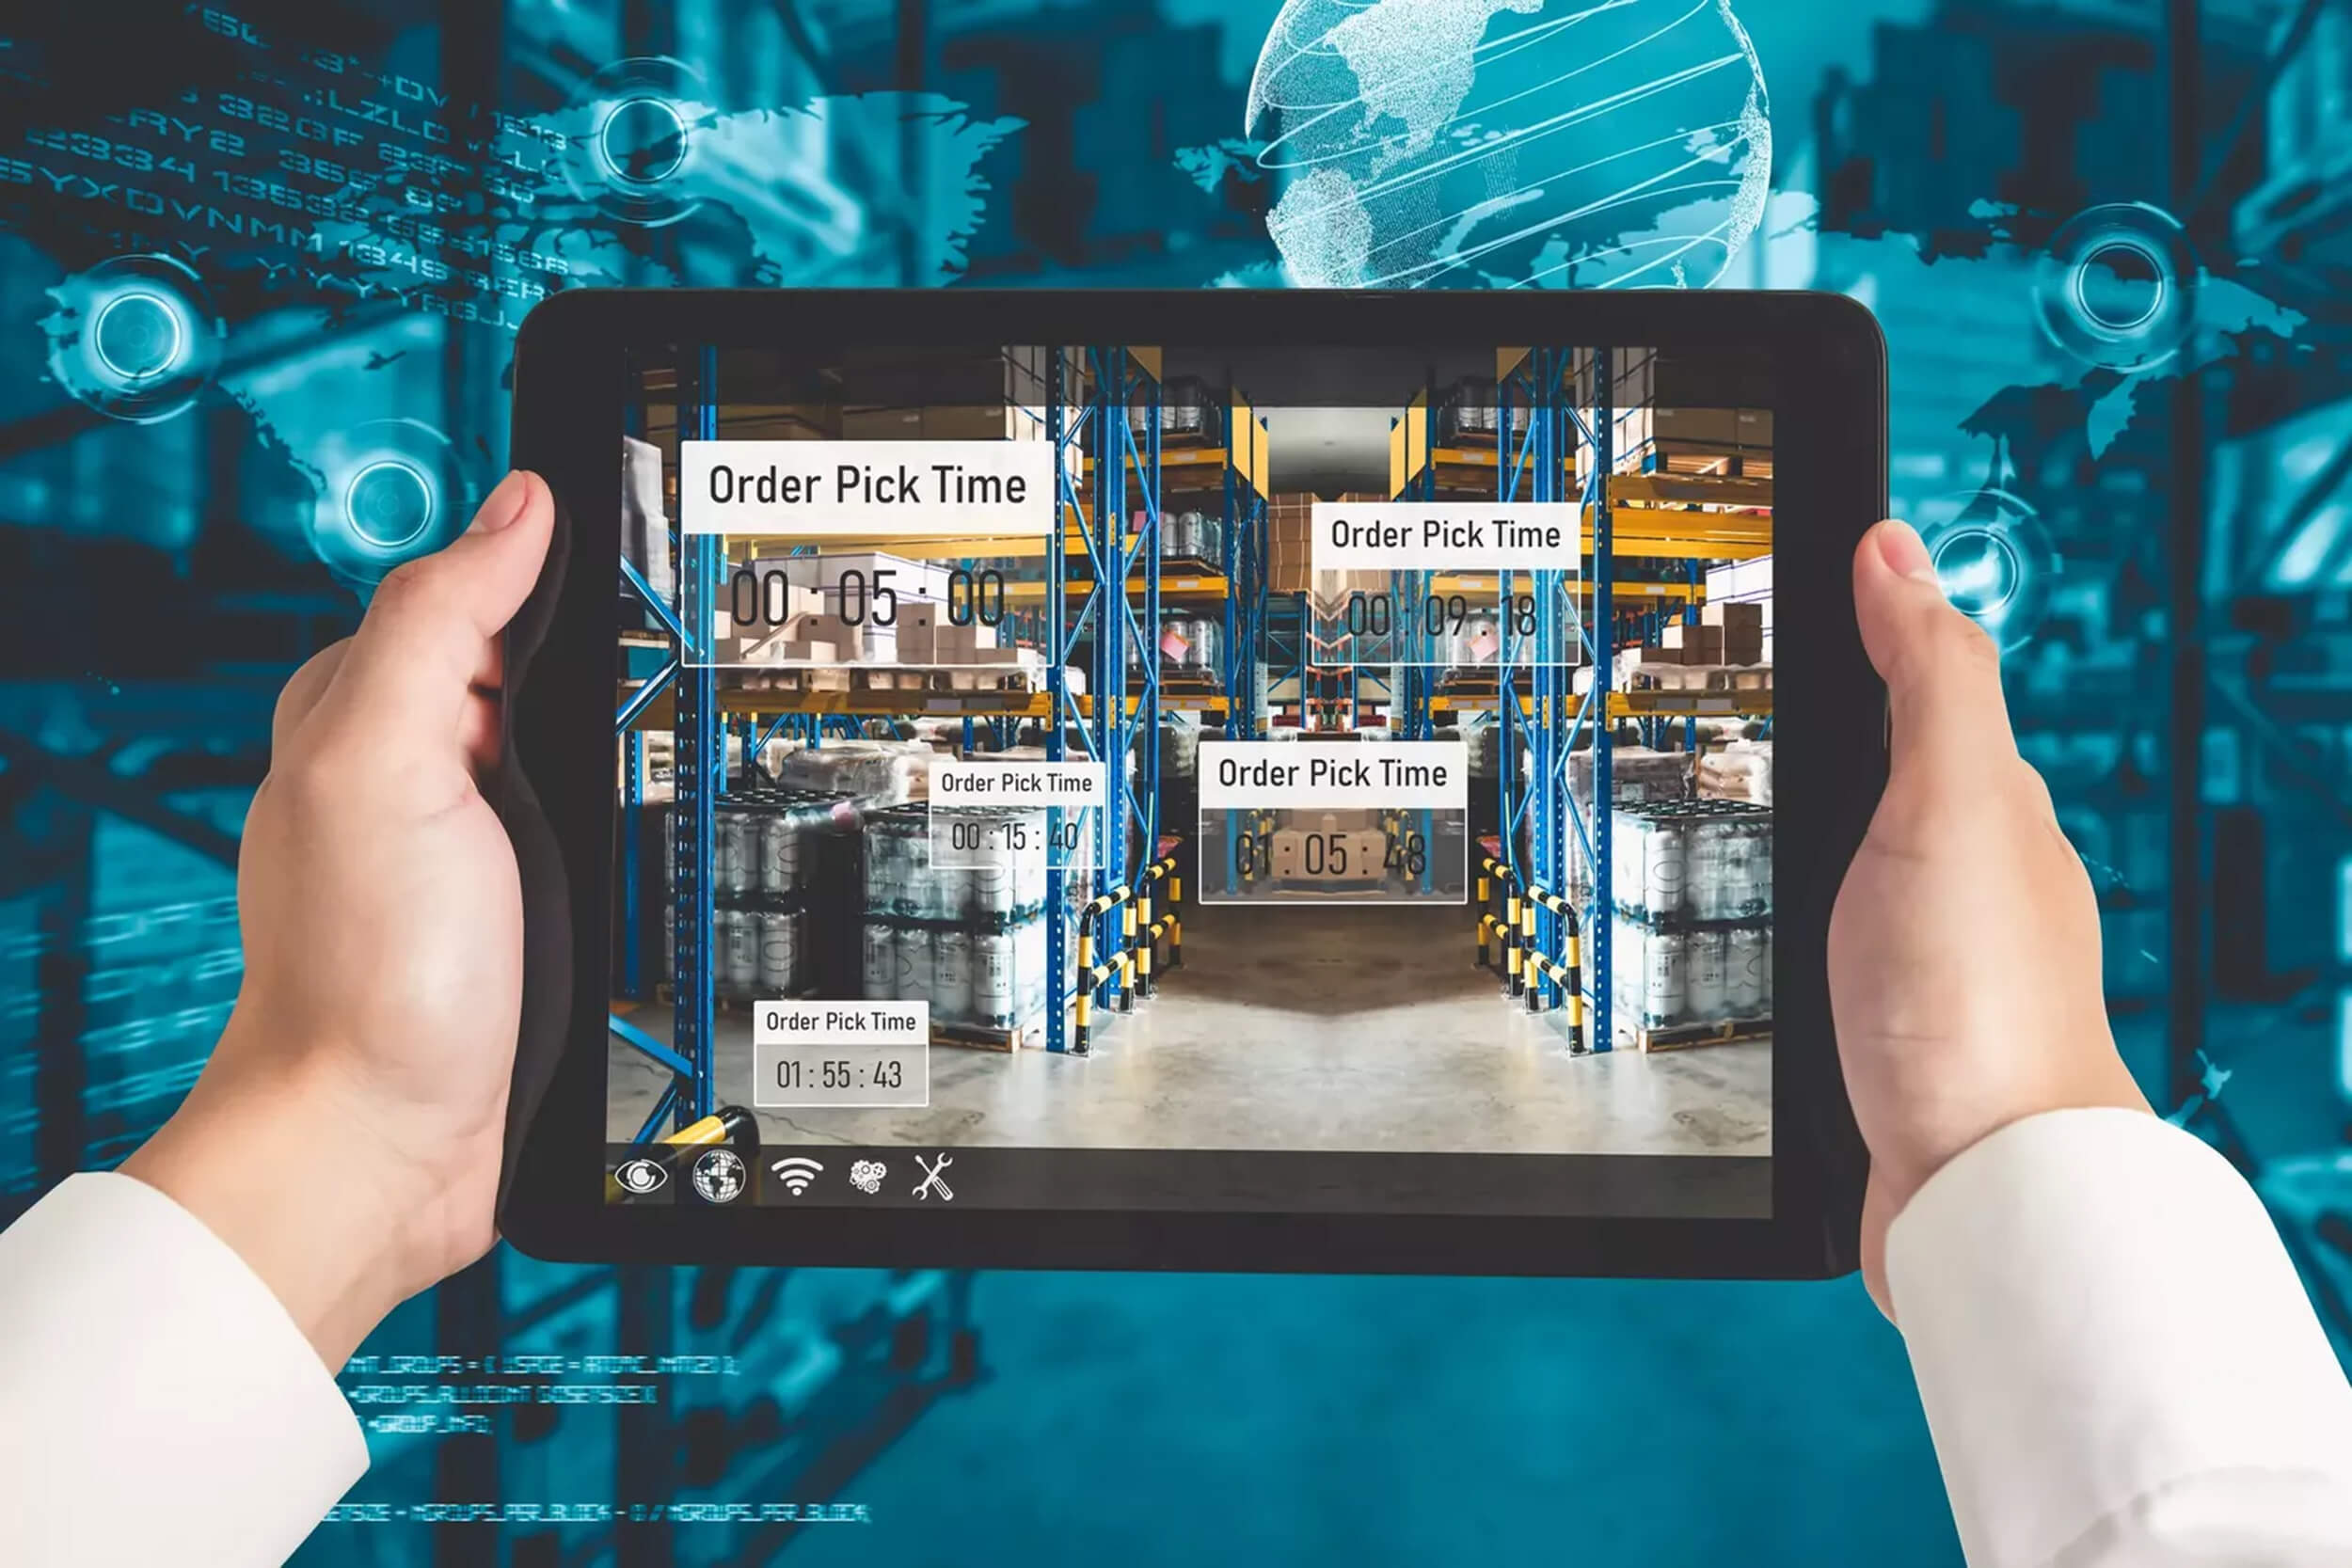 Augmented reality allows workers to be more precise and do away with cumbersome written lists and instructions.